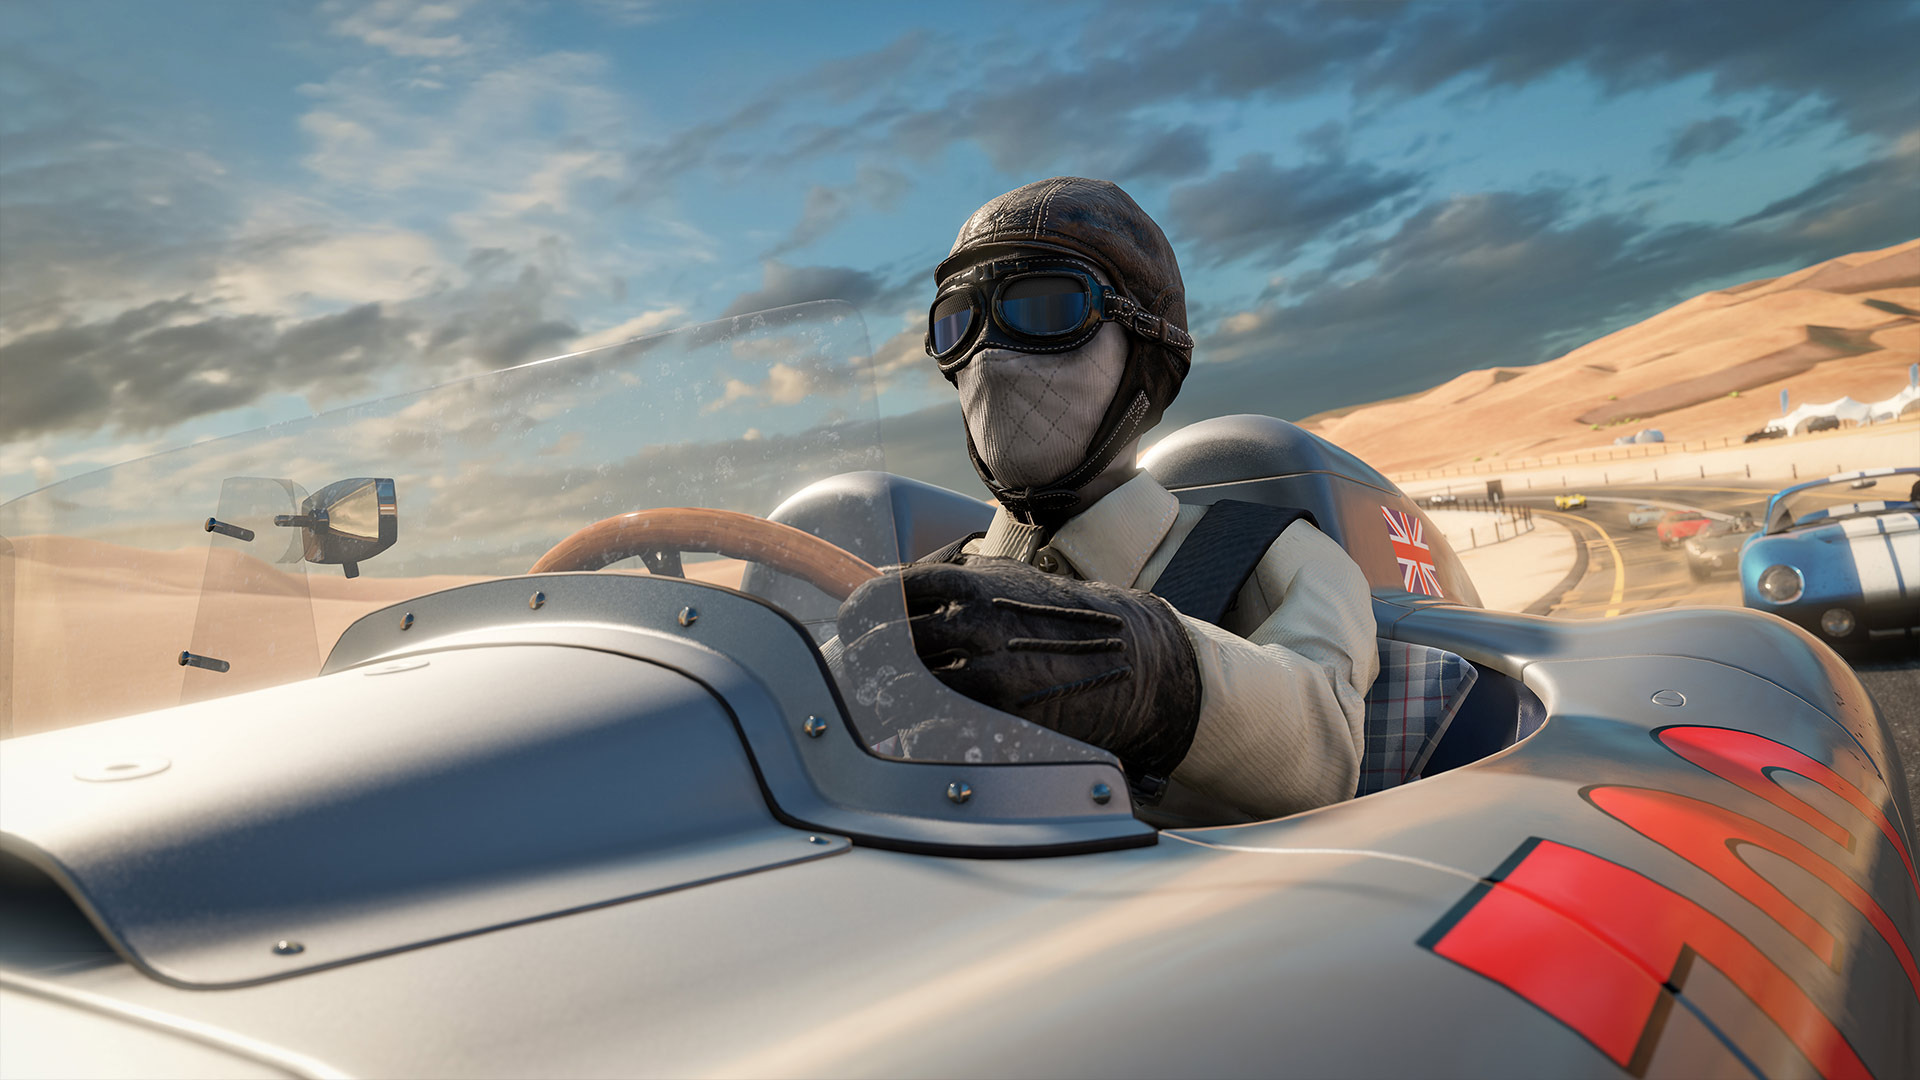 Forza Motorsport 7 (2017)  Price, Review, System Requirements